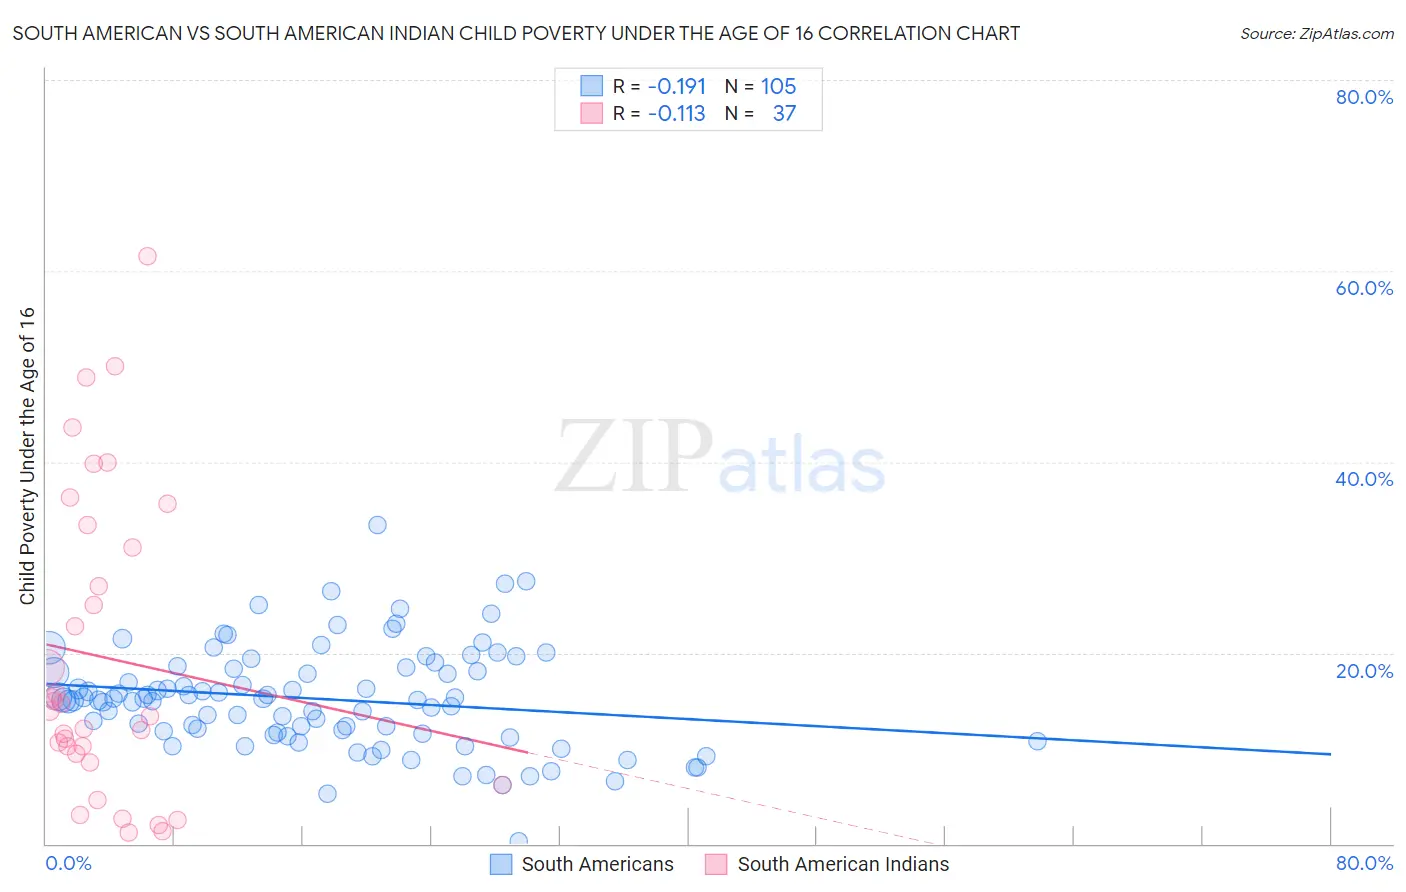 South American vs South American Indian Child Poverty Under the Age of 16